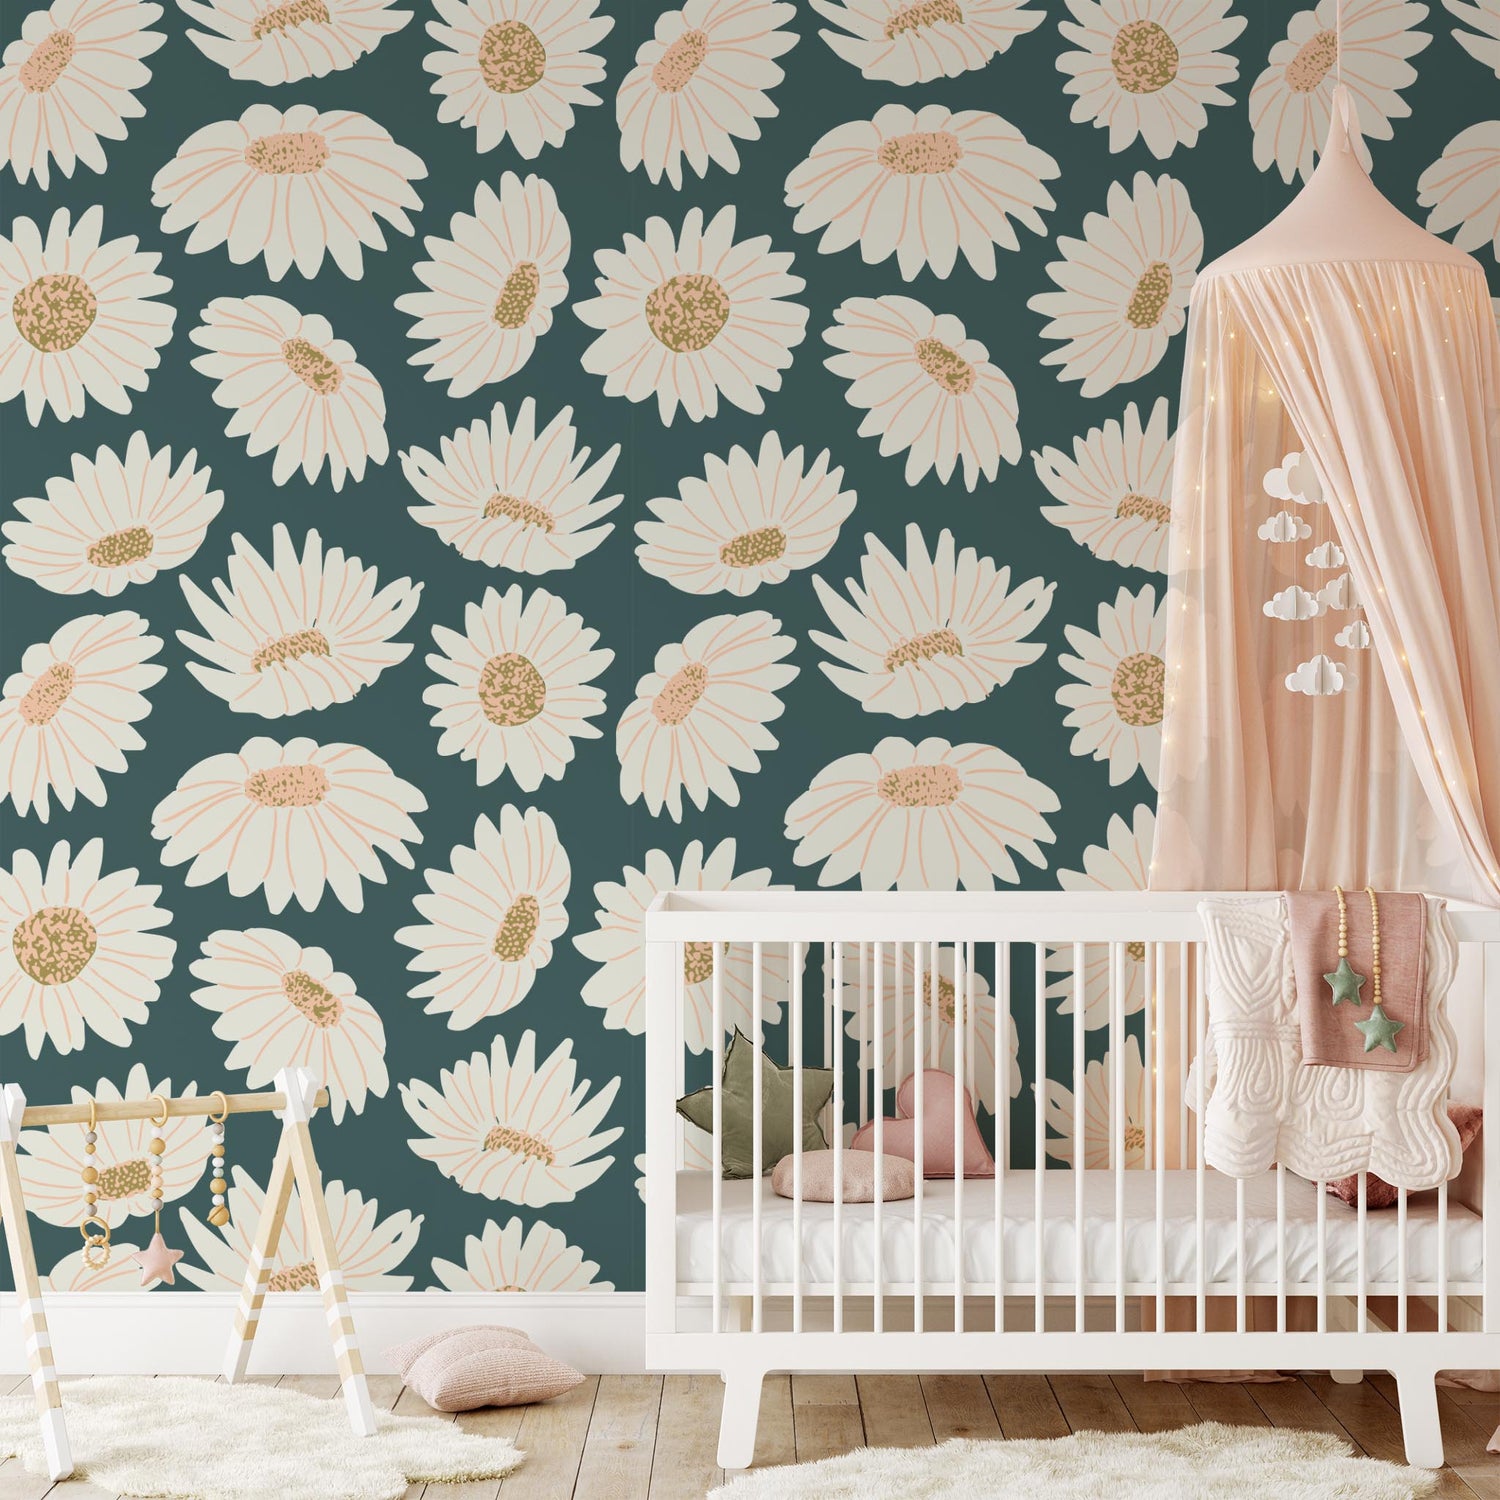 Nursery room preview of Daisies Wallpaper in Forest Green by artist Brenda Bird